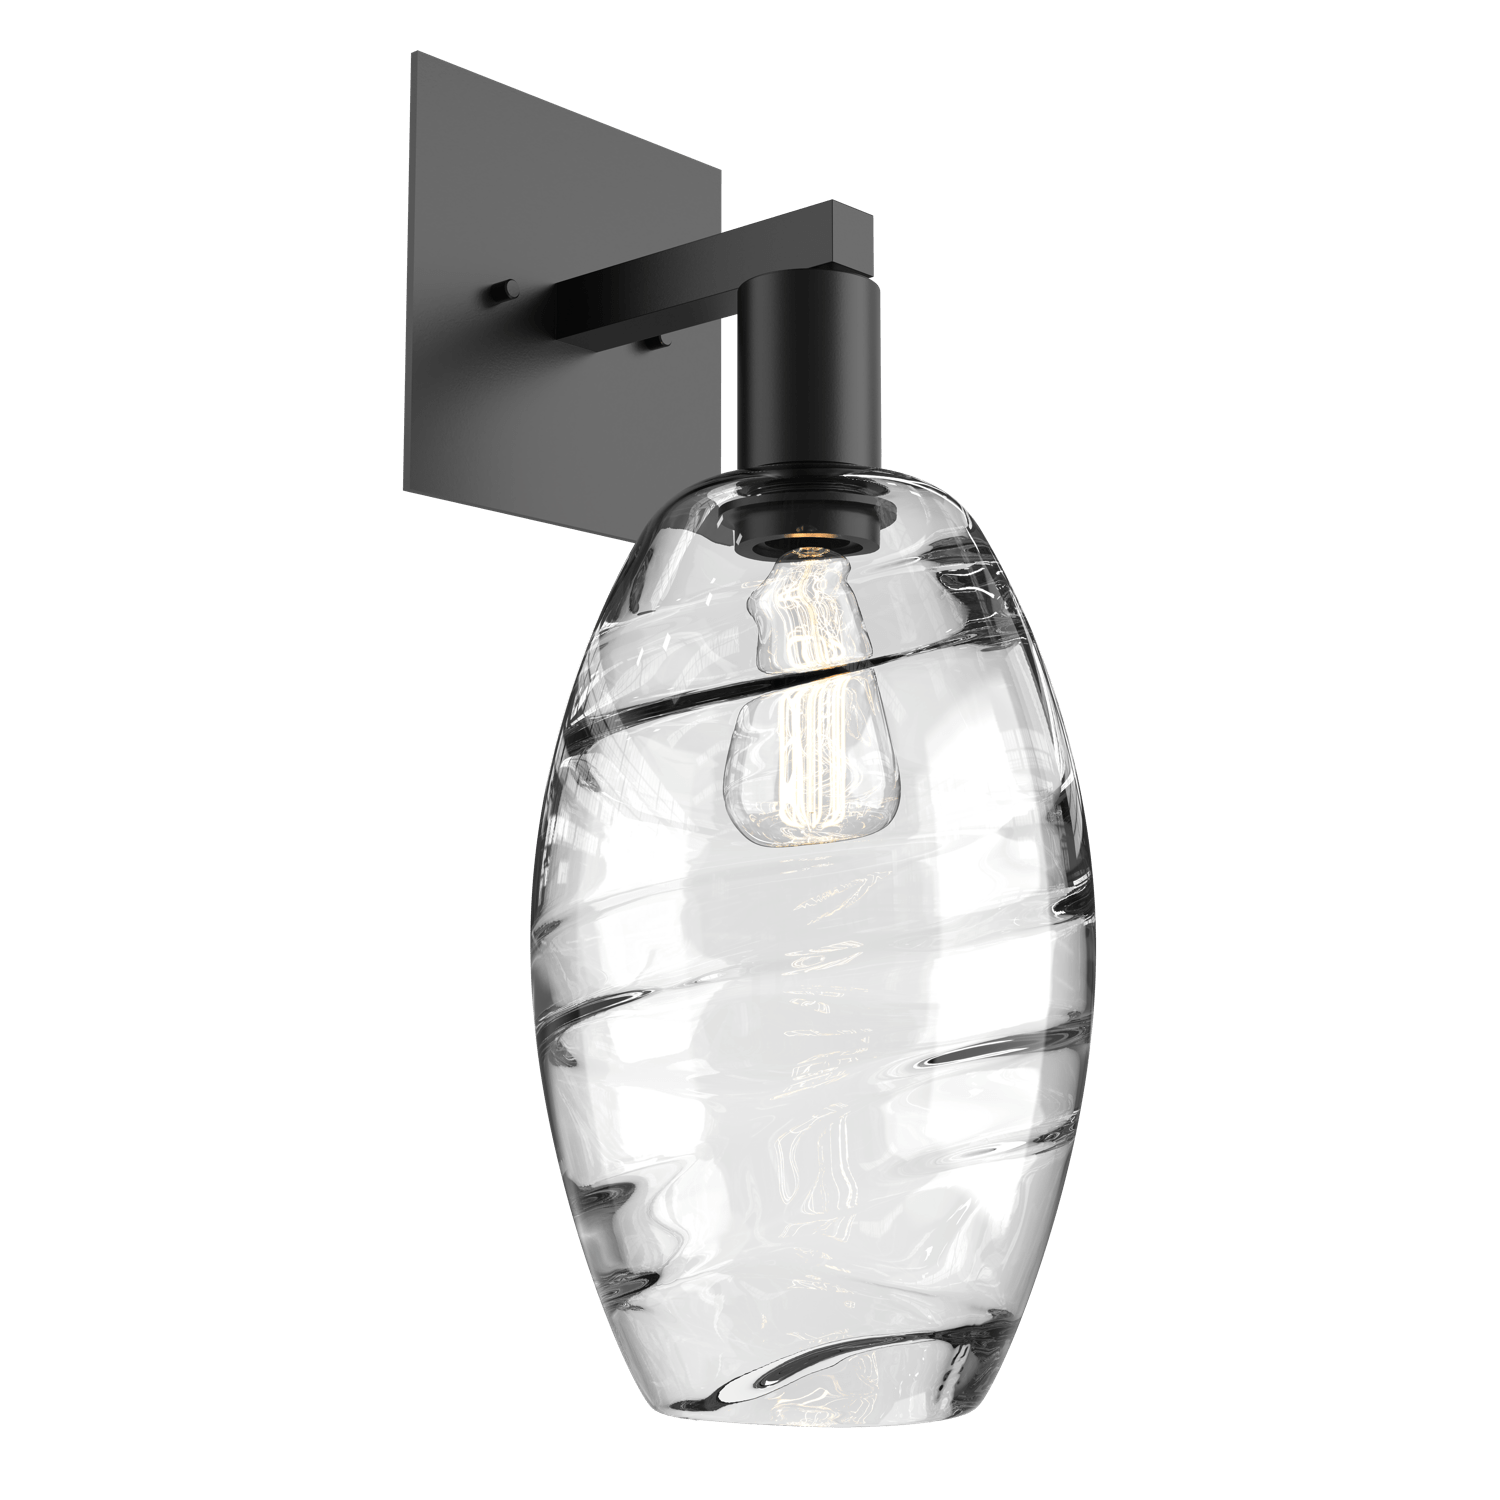 IDB0035-16-MB-OC-Hammerton-Studio-Optic-Blown-Glass-Elisse-wall-sconce-with-matte-black-finish-and-optic-clear-blown-glass-shades-and-incandescent-lamping